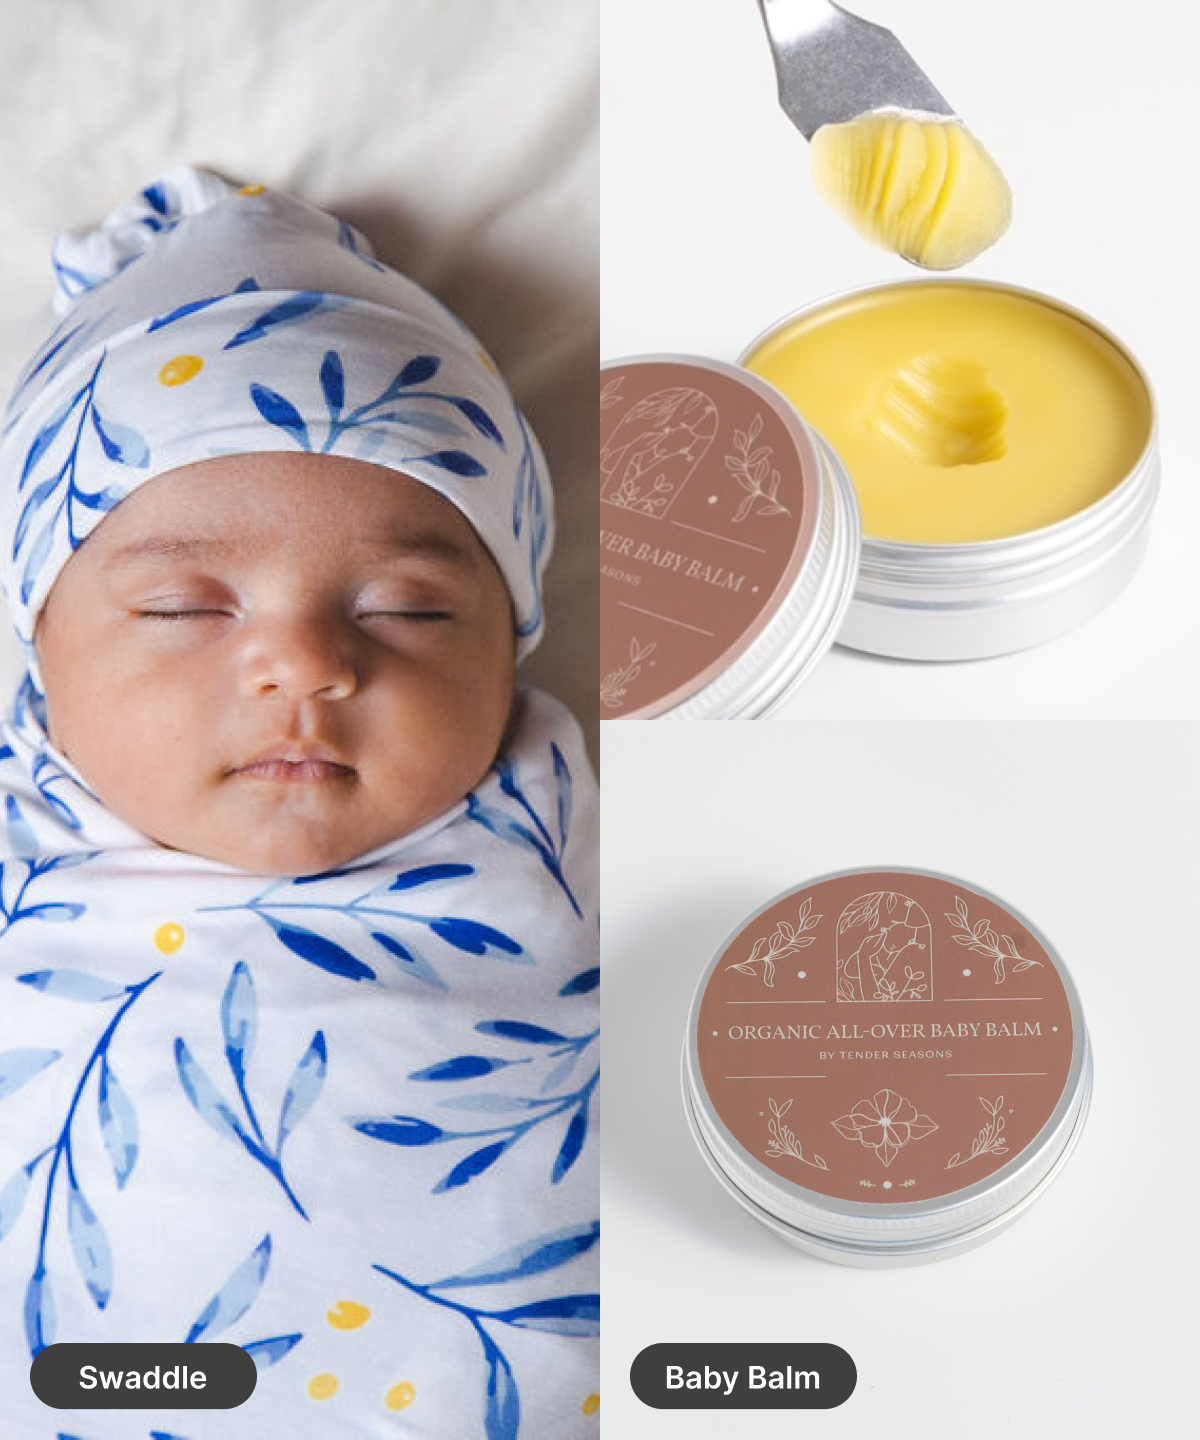 Group photo of baby in swaddle and baby balm